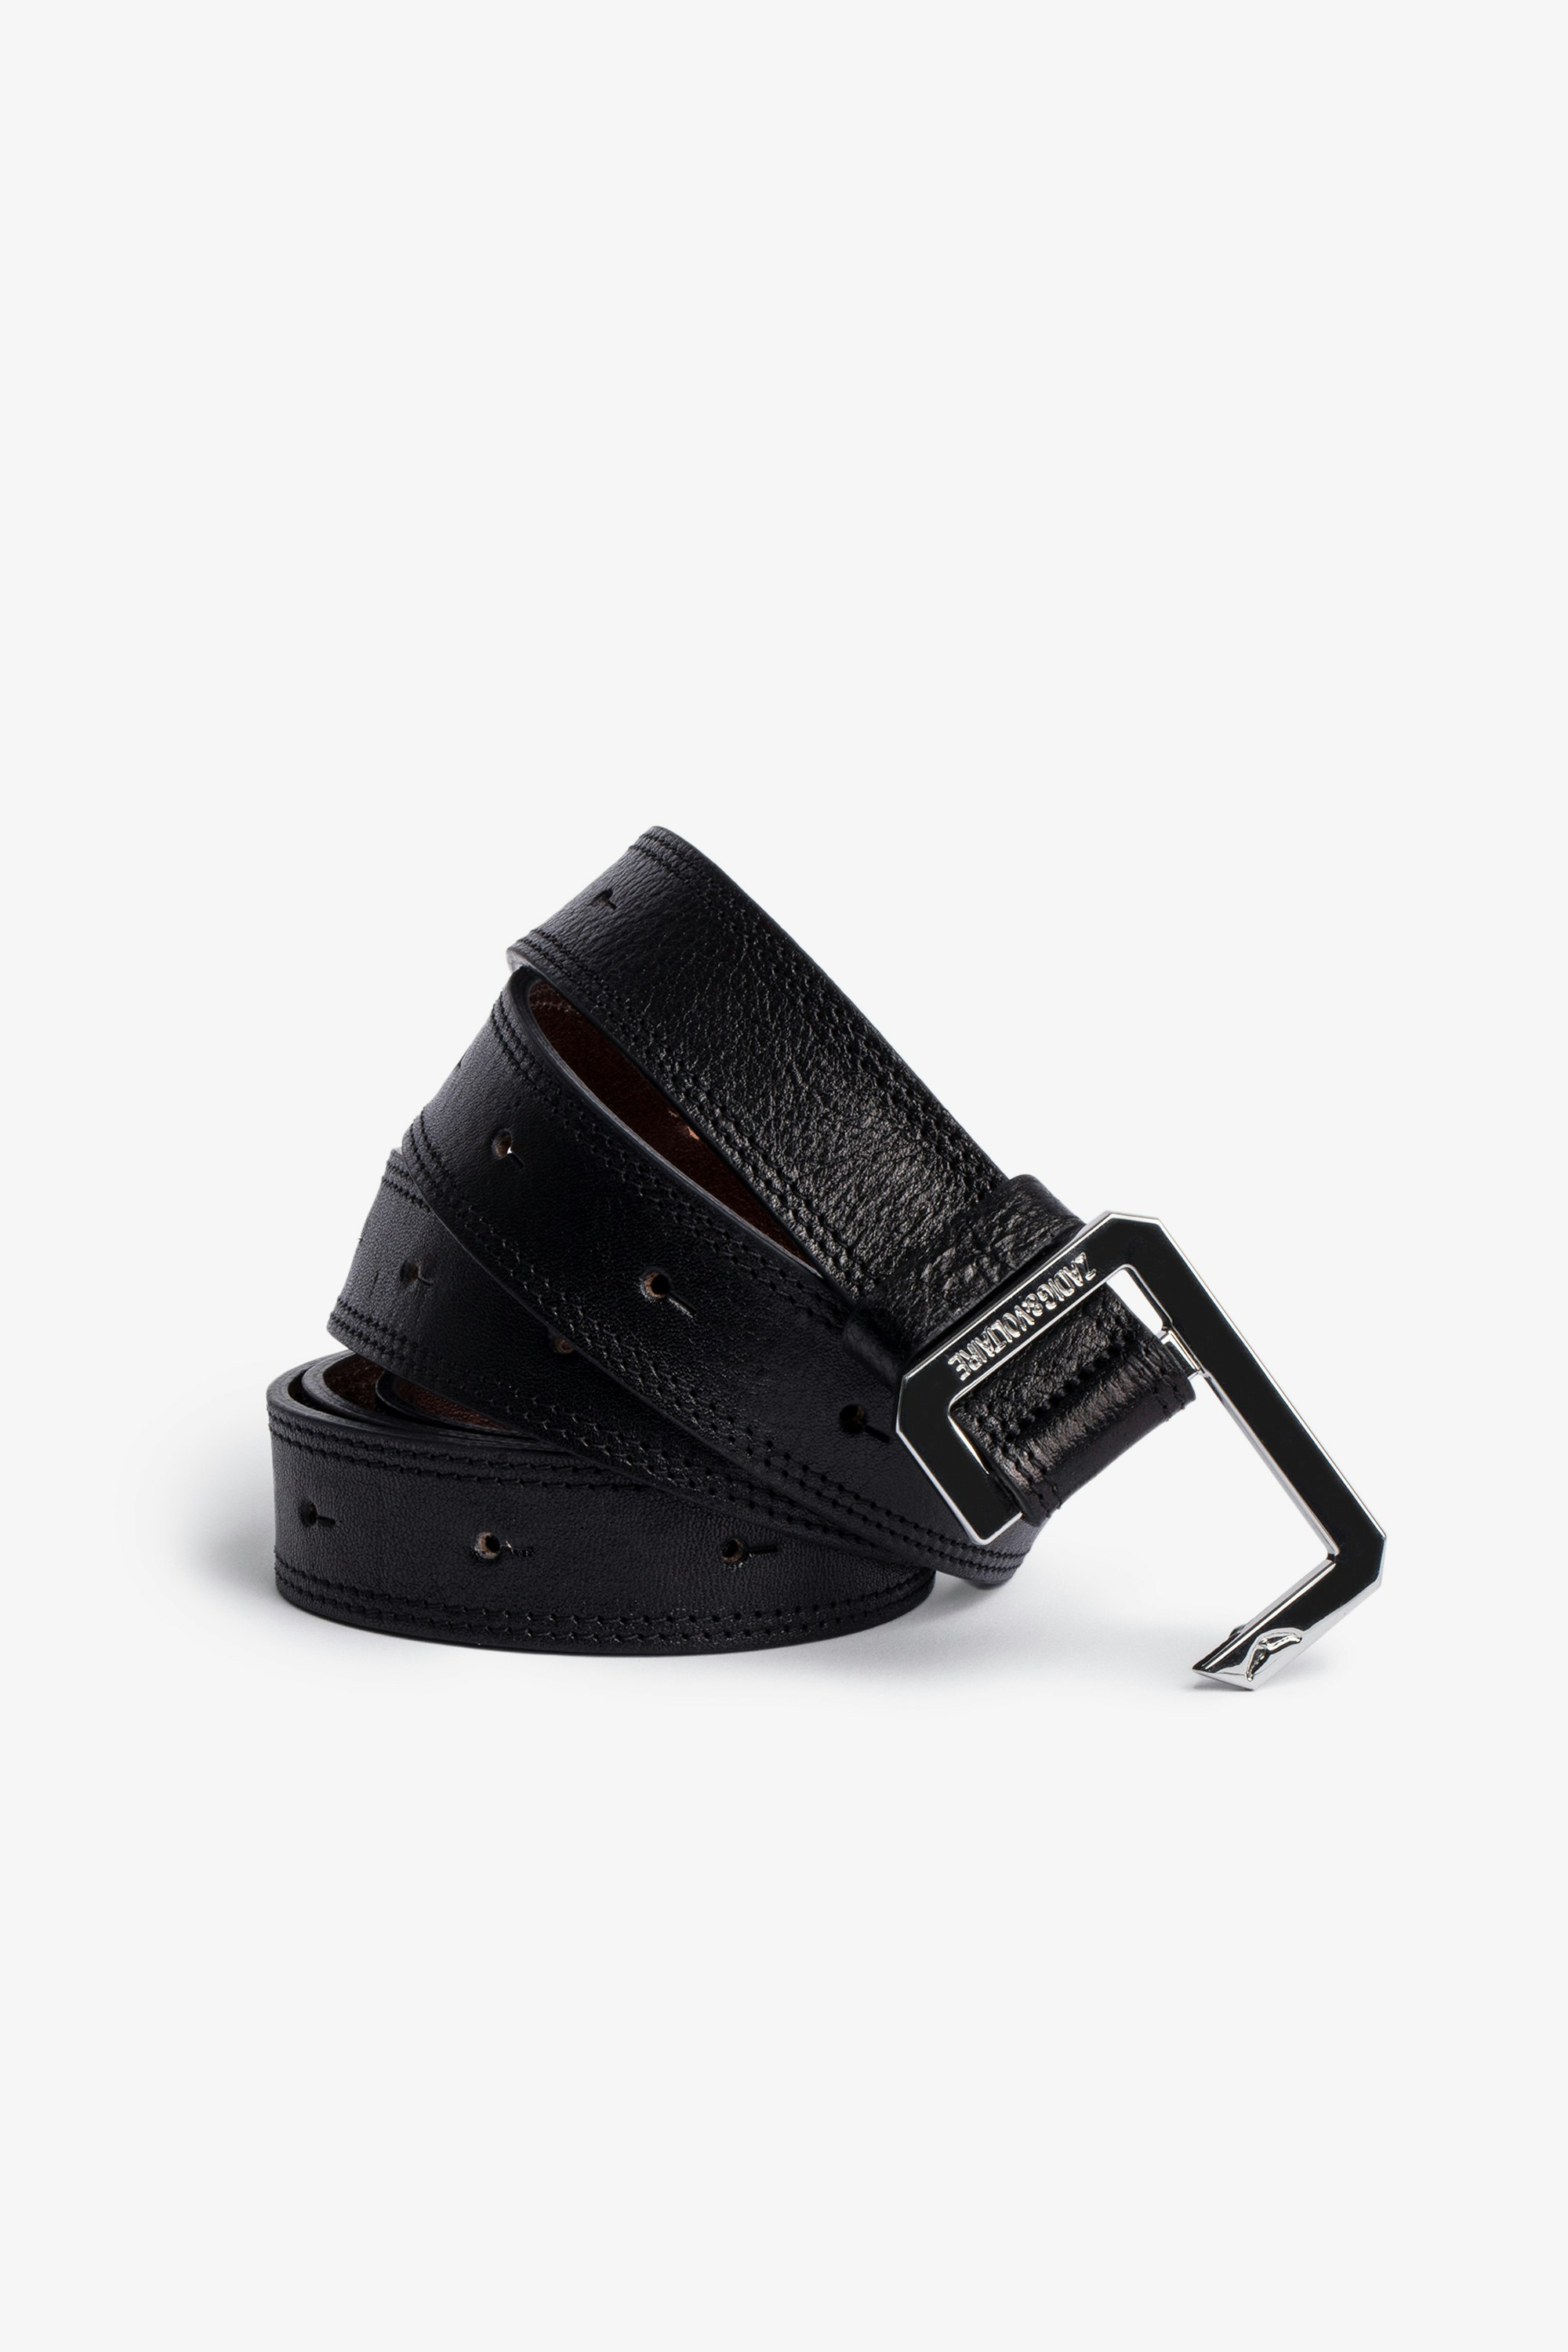 La Cecilia レザーベルト Women's black leather belt with black C-shaped buckle. Buying this product, you support a responsible leather production through Leather Working Group.